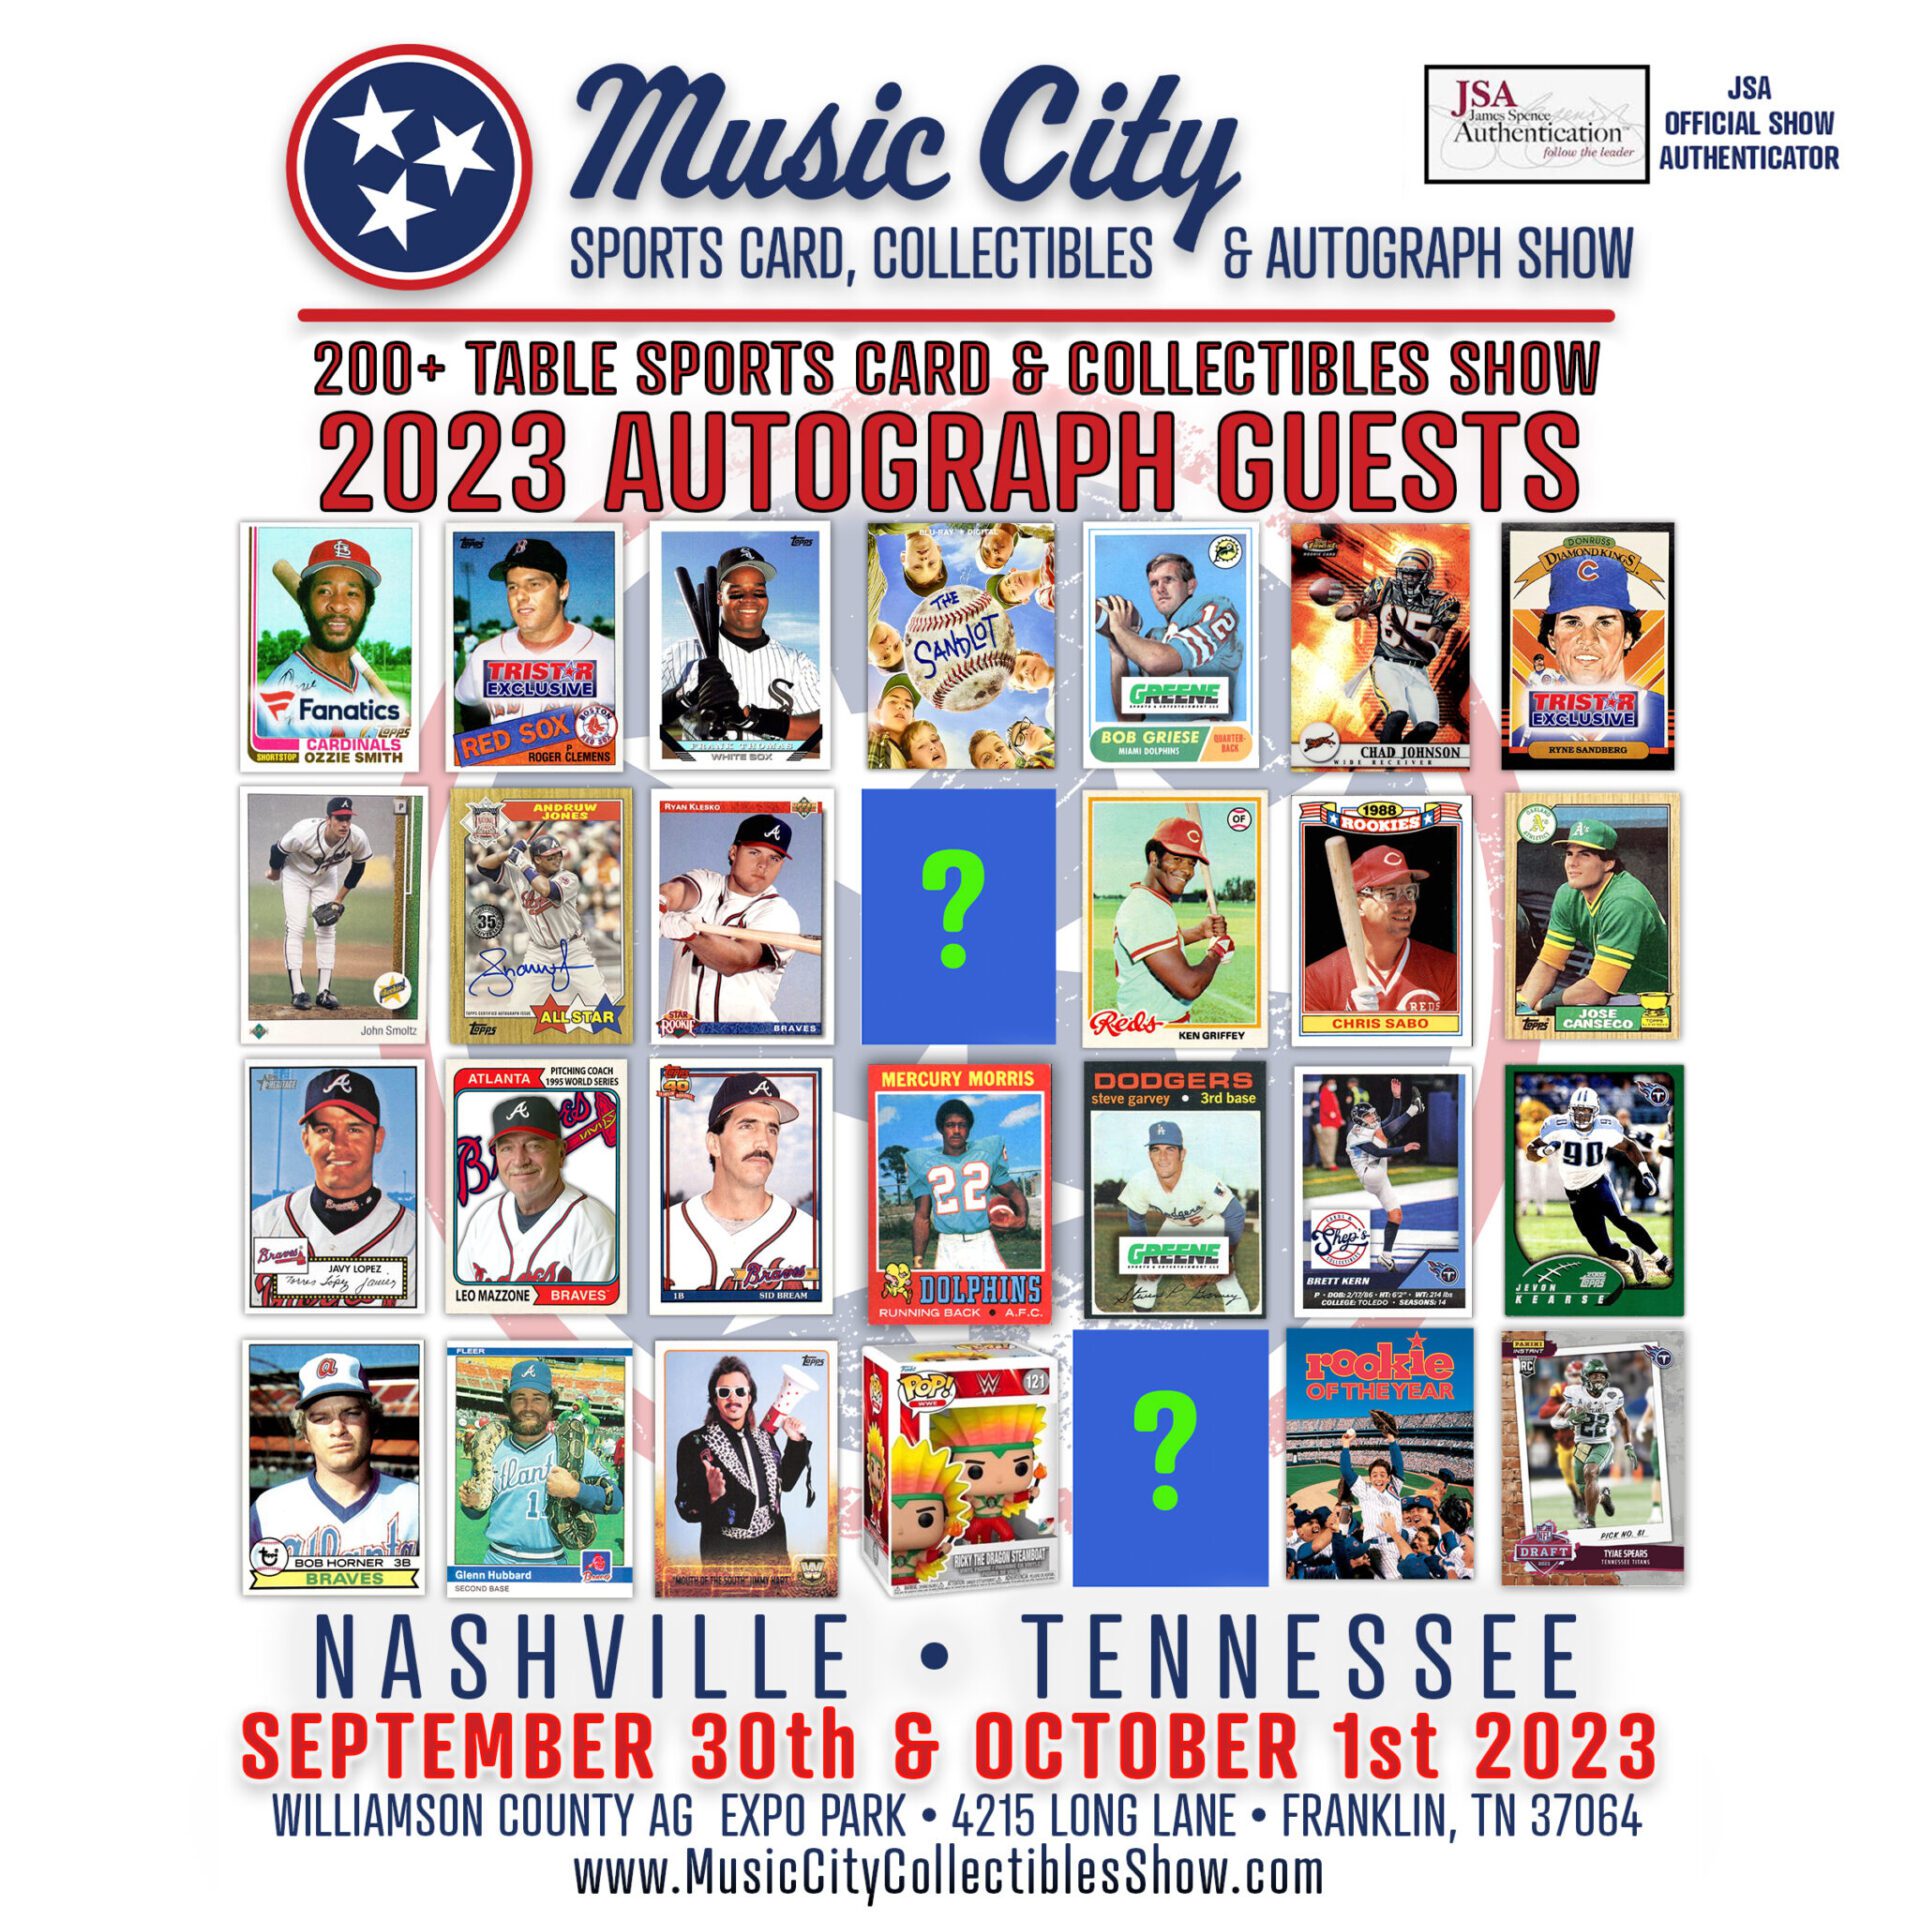 2023 Music City Sports Card & Autograph Show in Franklin, Tennessee.